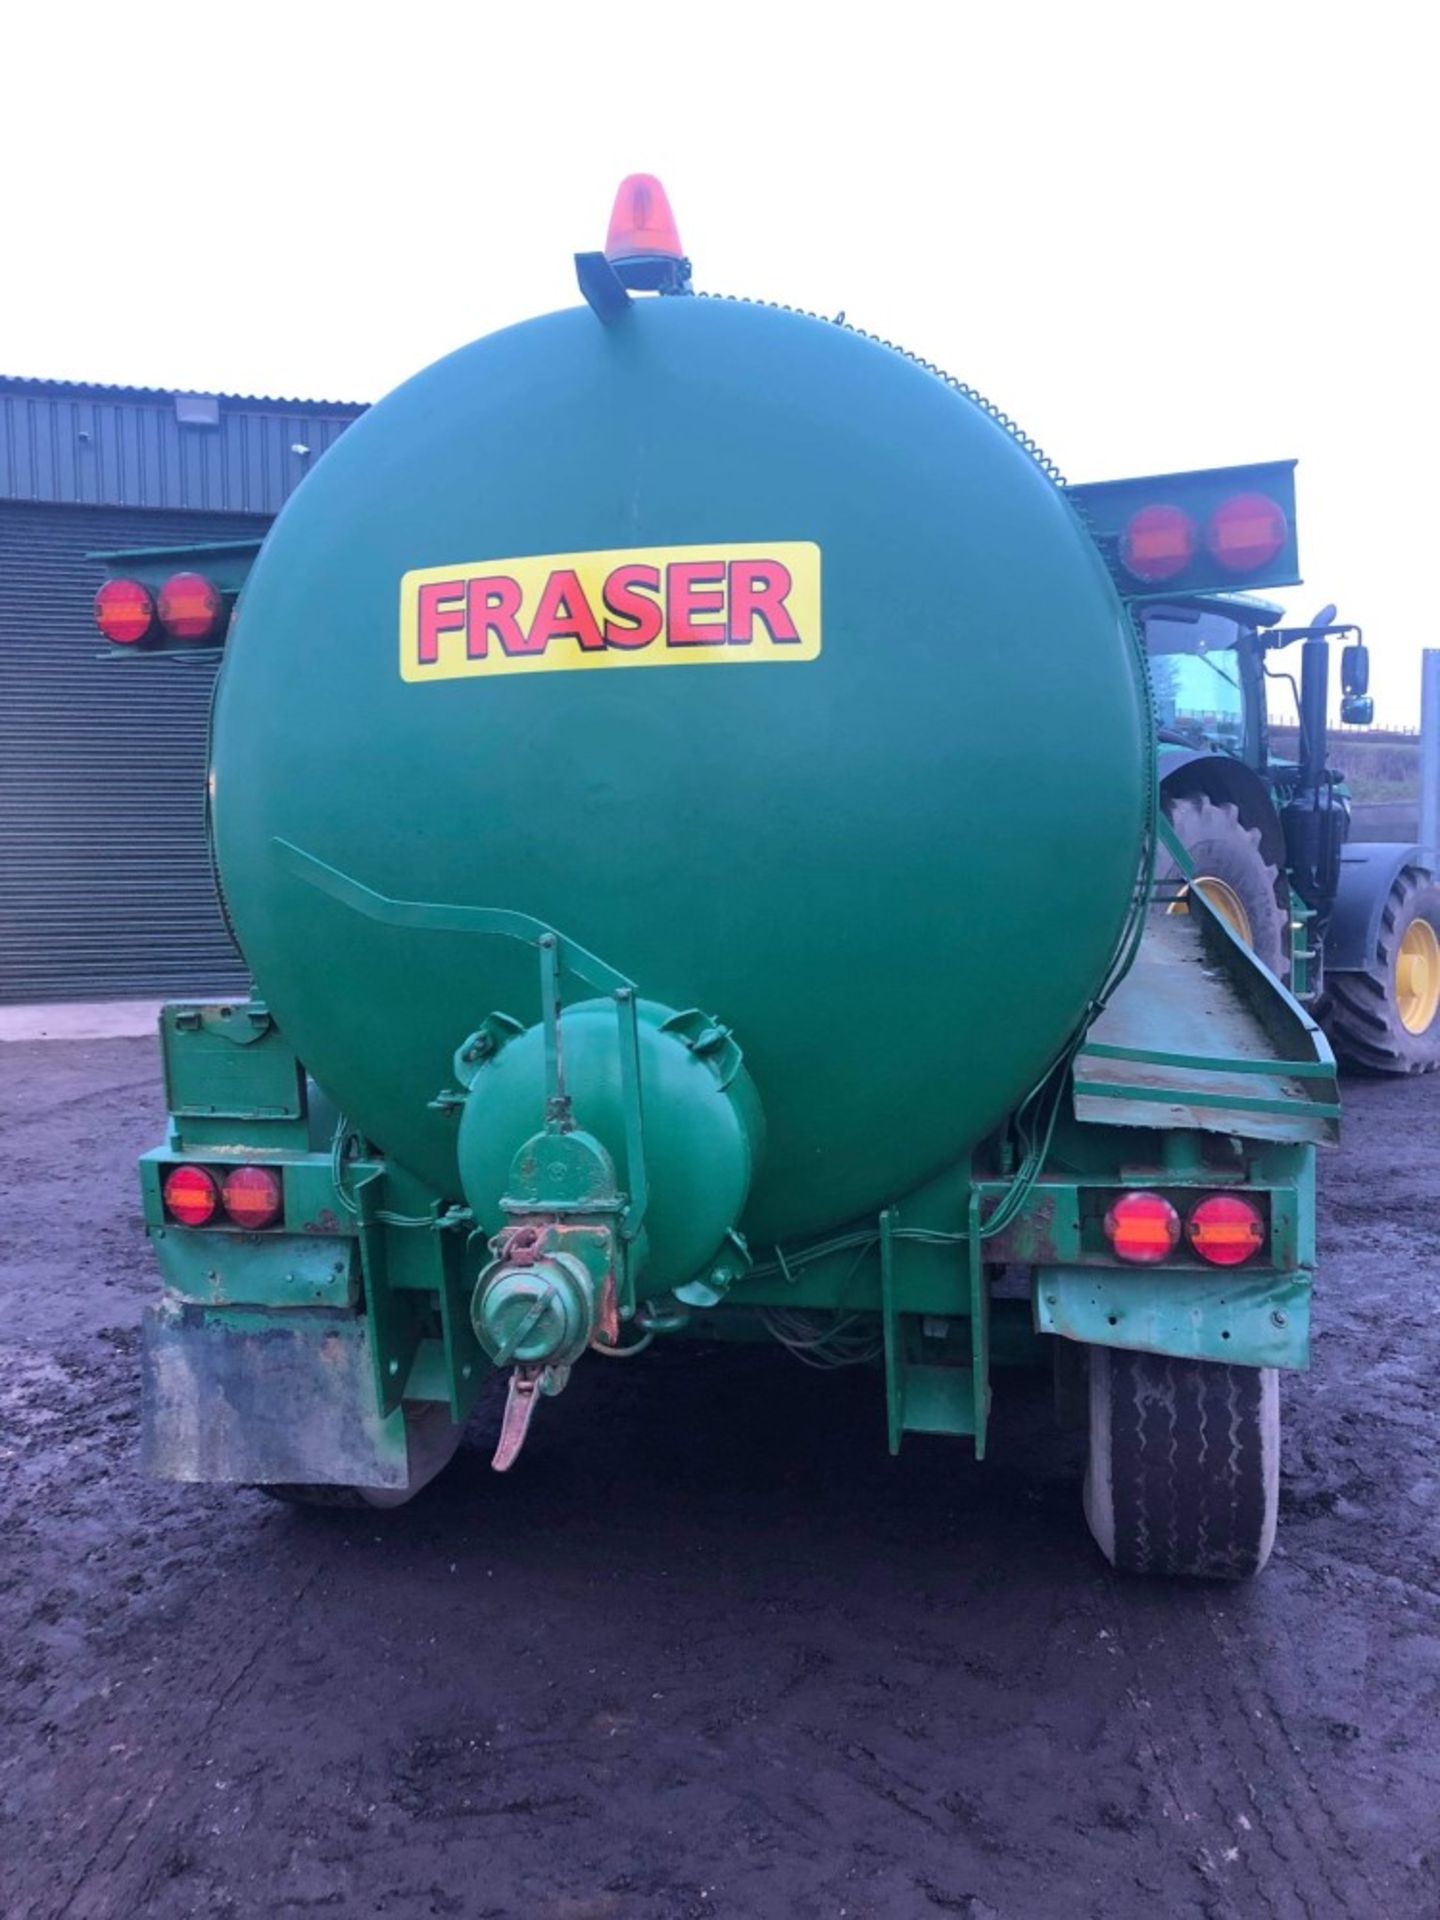 FRASER 2850 GALLON VACUUM TANKER (LOCATION SHEFFIELD) COMMERCIAL AXLES & AIR BRAKES (RING FOR - Image 4 of 4